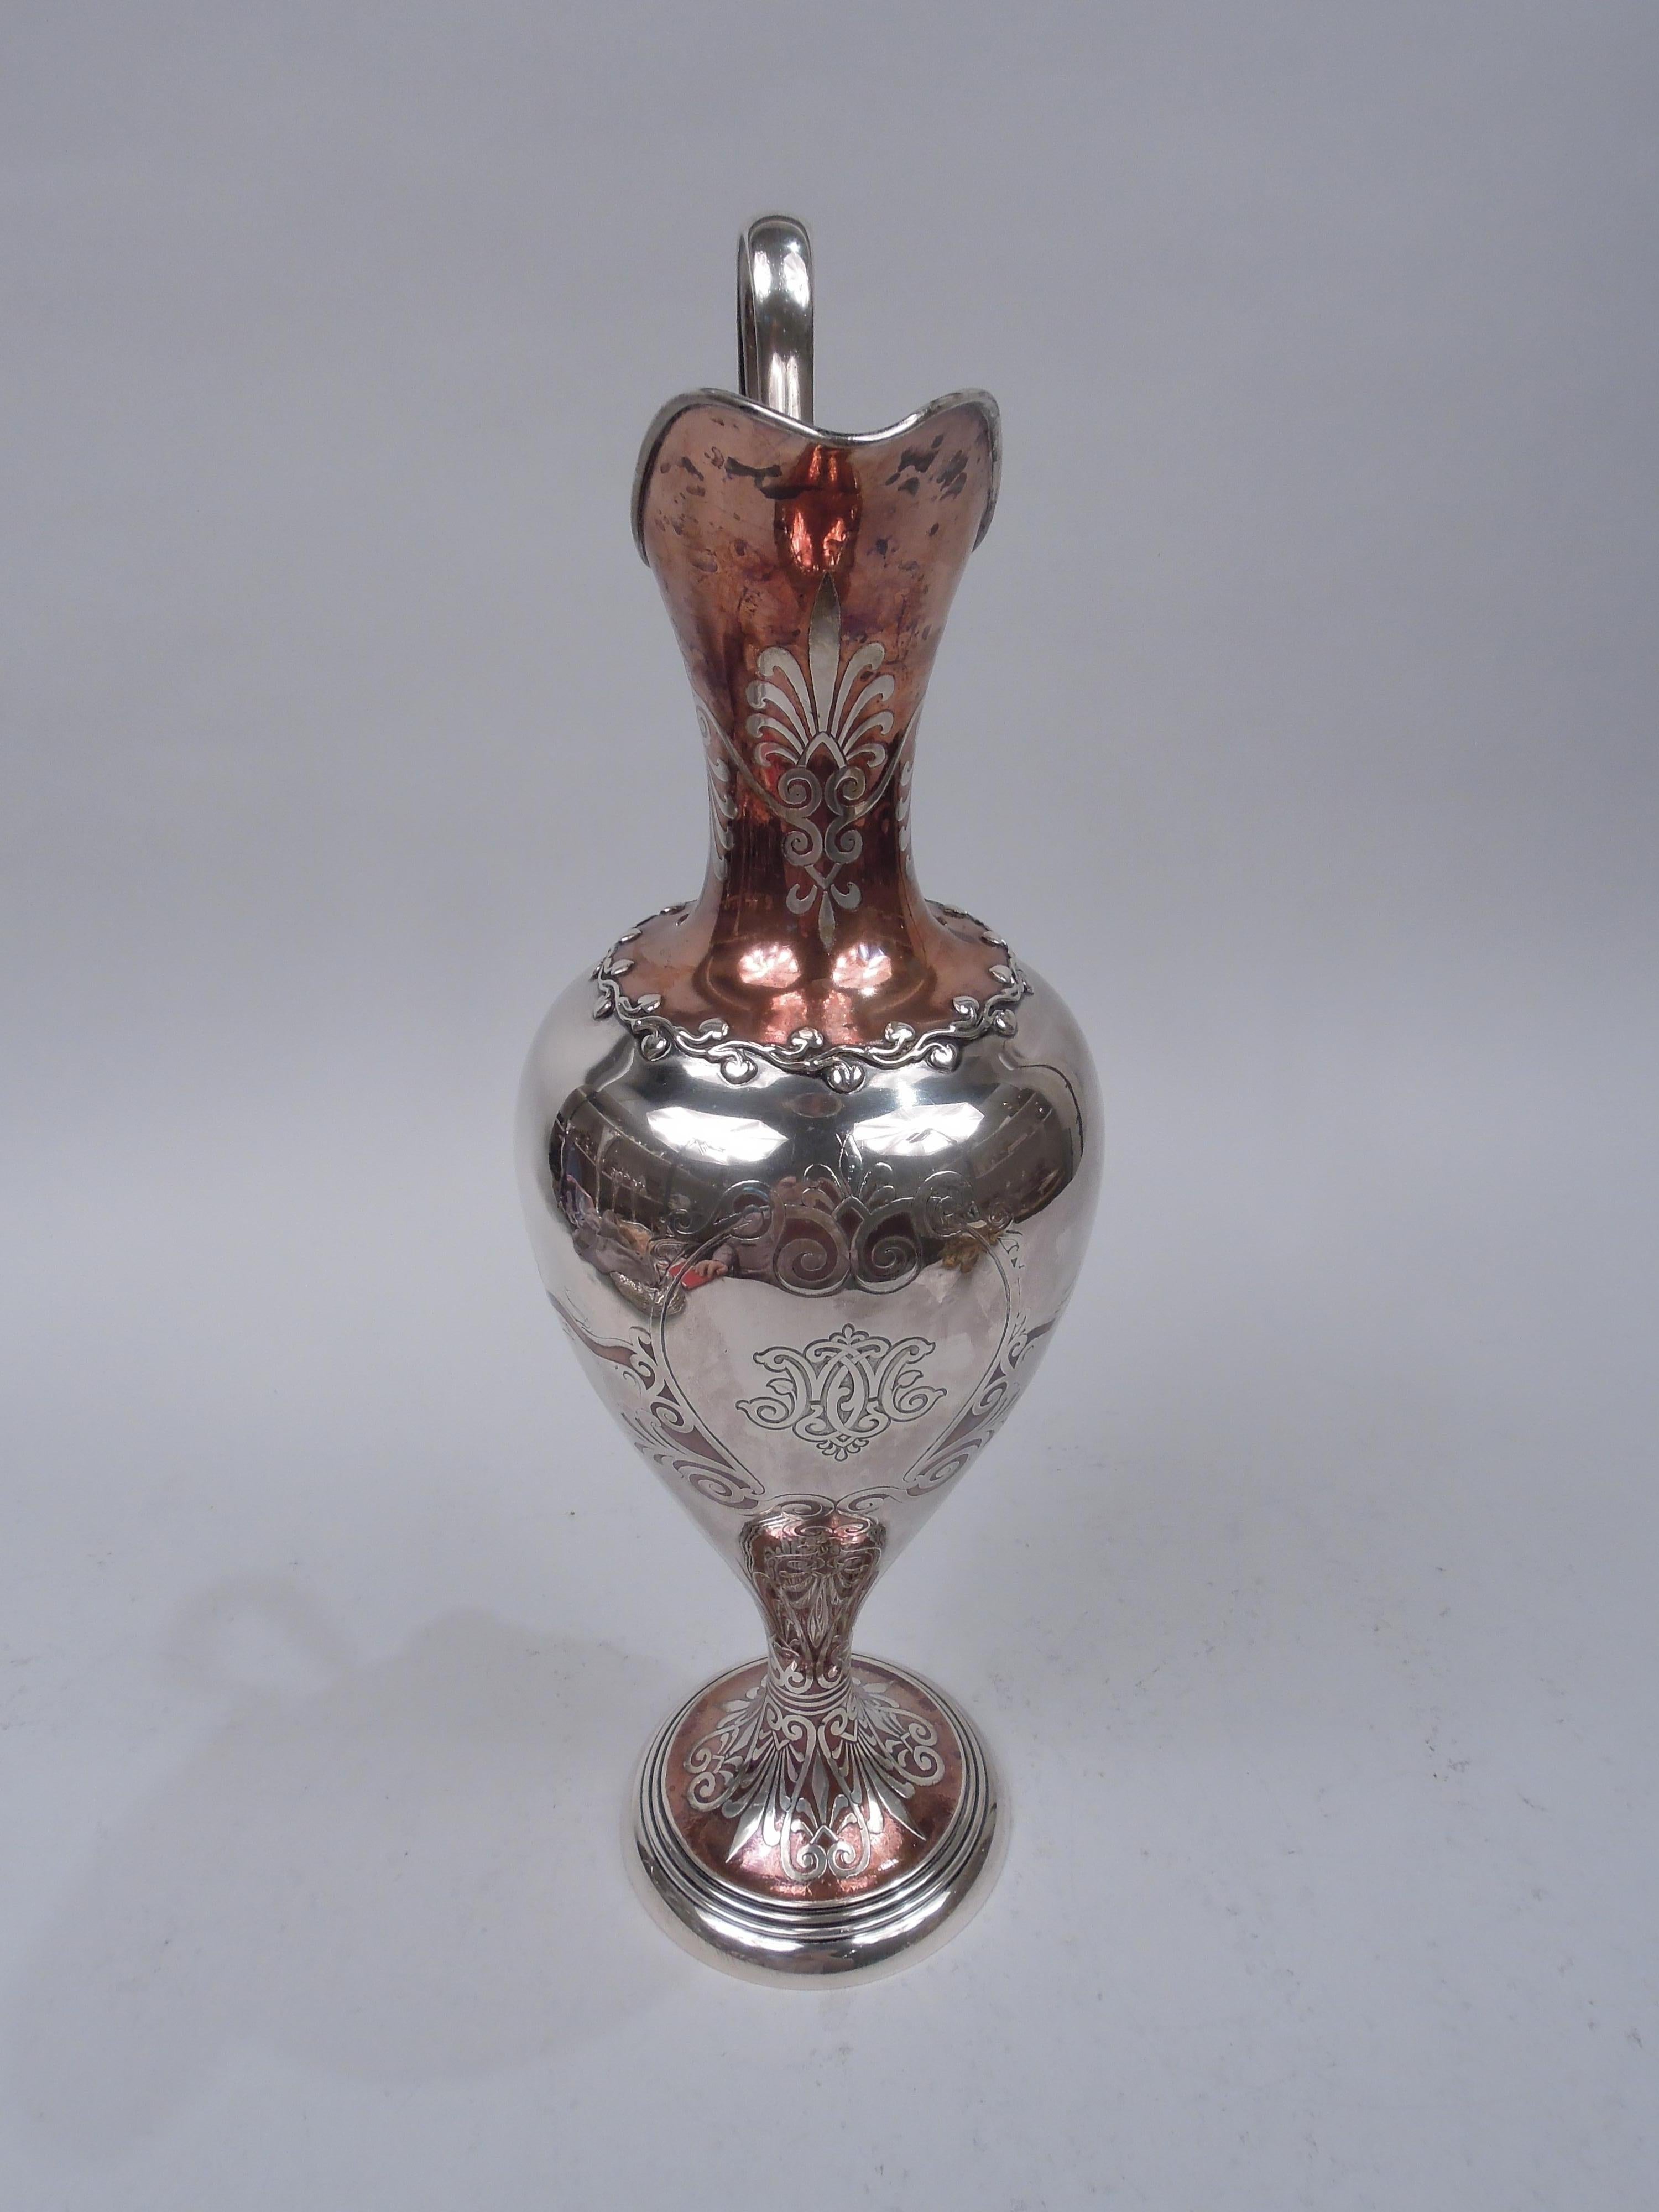 Edwardian mixed metal sterling silver ewer. Made by Tiffany & Co. in New York. Helmet mouth with high looping leaf-mounted handle; ovoid body on domed foot. Mouth, neck, and foot have copper ground. Applied meandering border on shoulder. Acid-etched